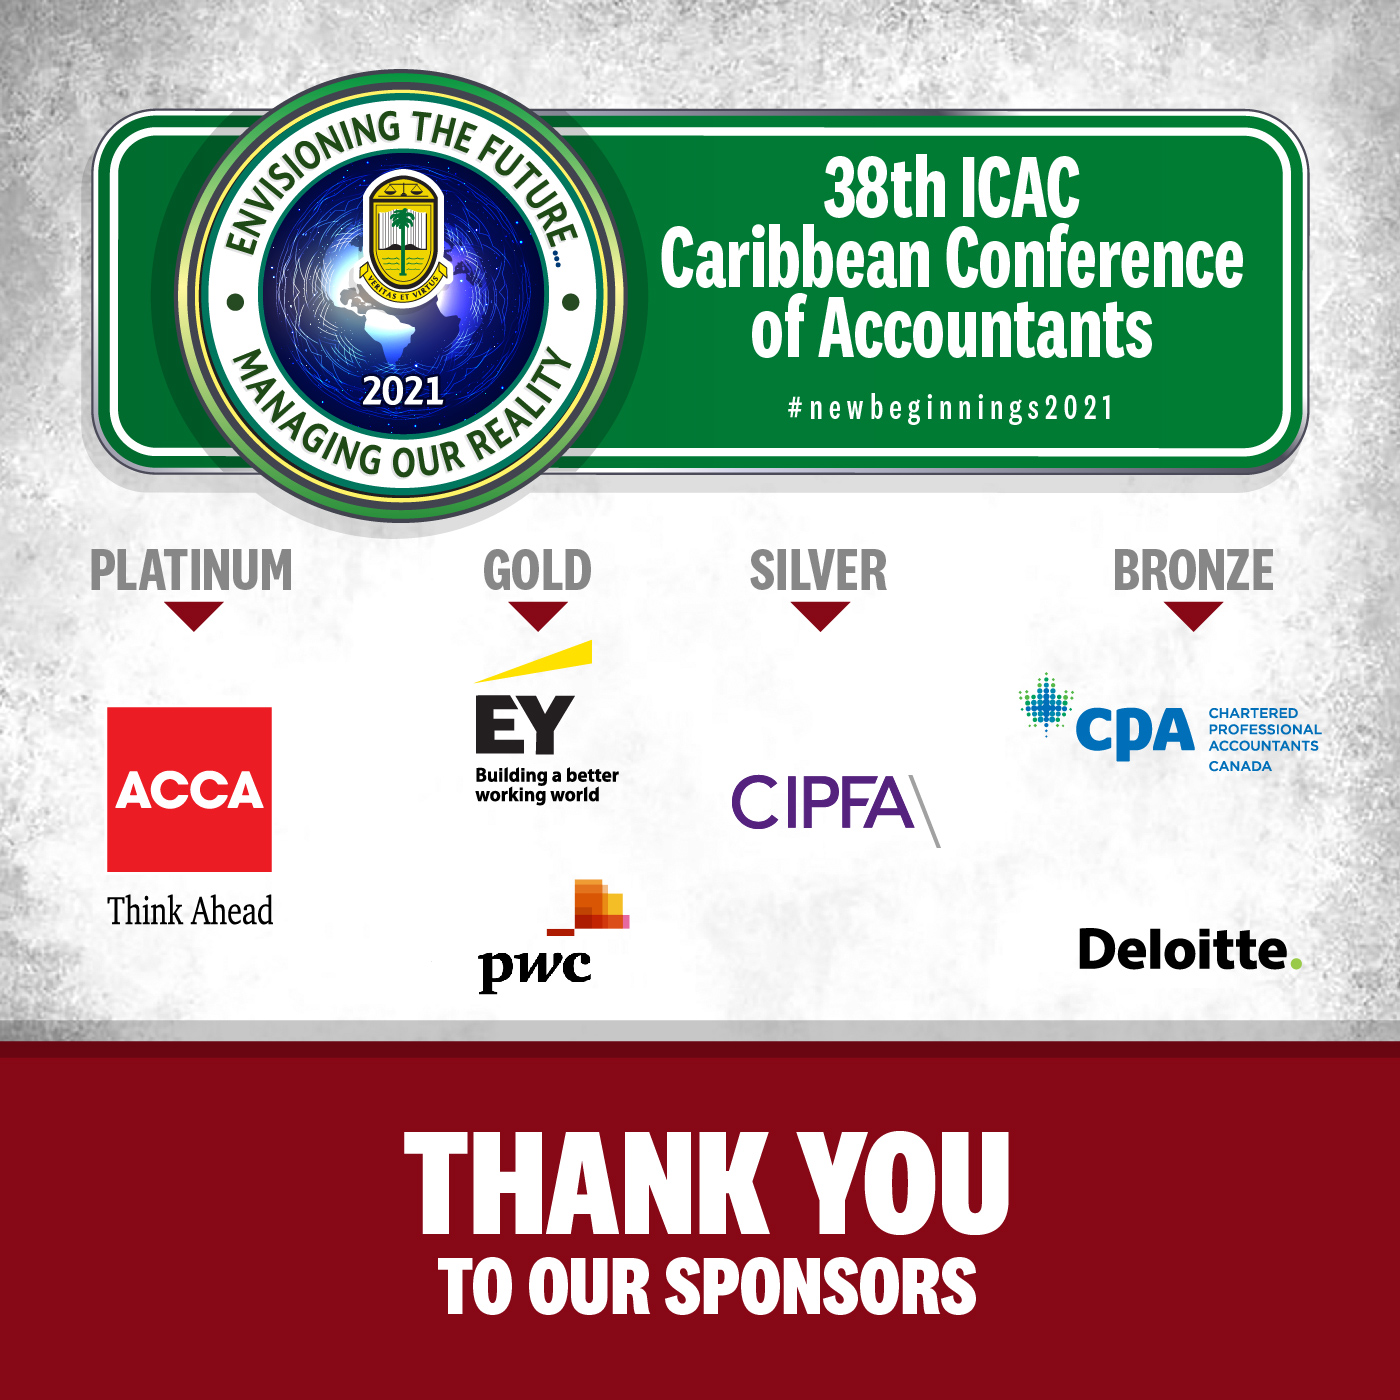 ICAC THANK YOU SPONSORS 01 